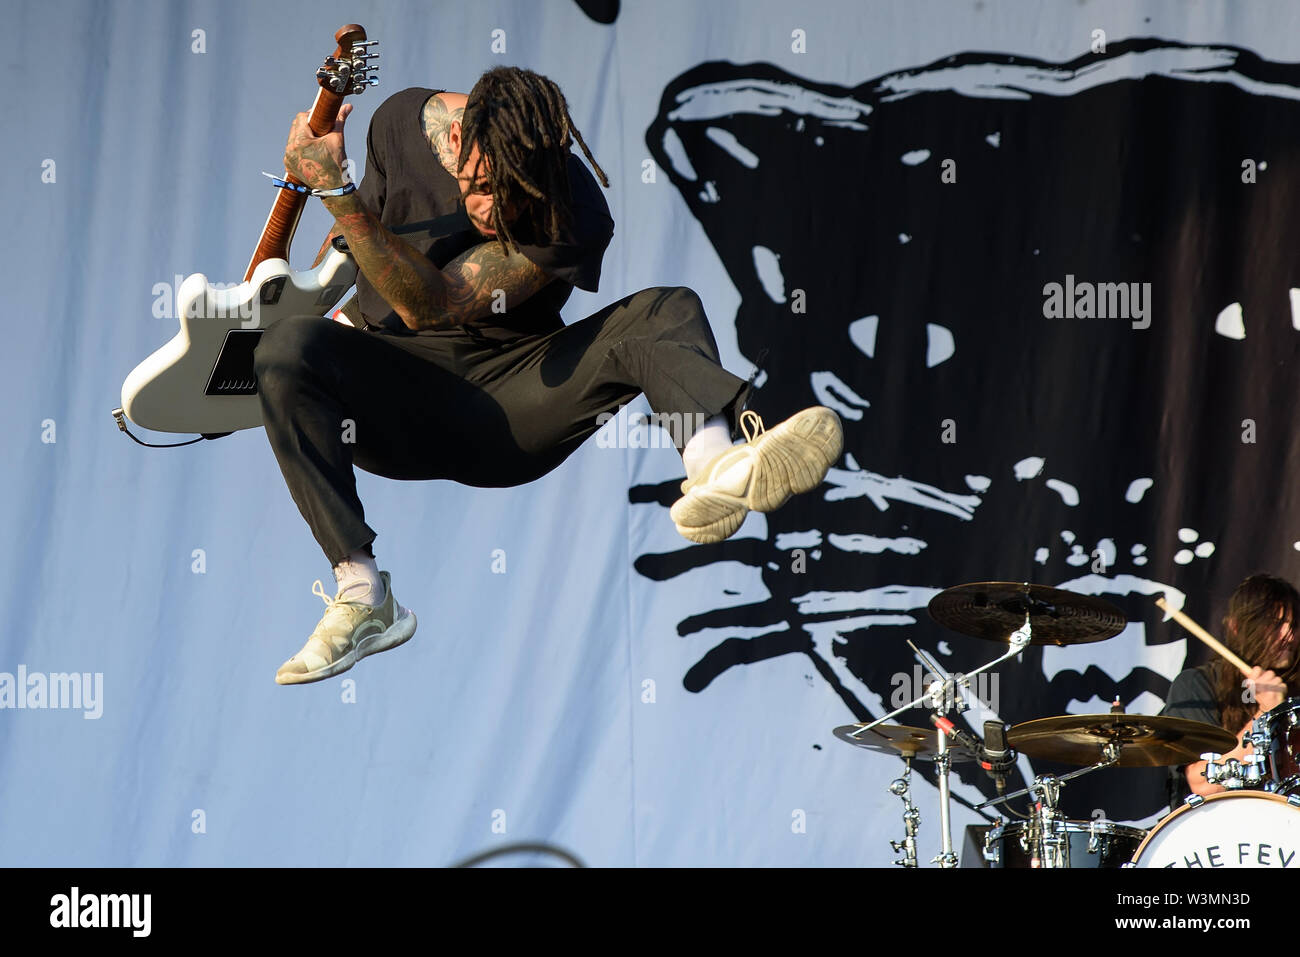 MADRID - JUN 30: Fever 333 (band) perform in concert at Download (heavy metal music festival) on June 30, 2019 in Madrid, Spain. Stock Photo